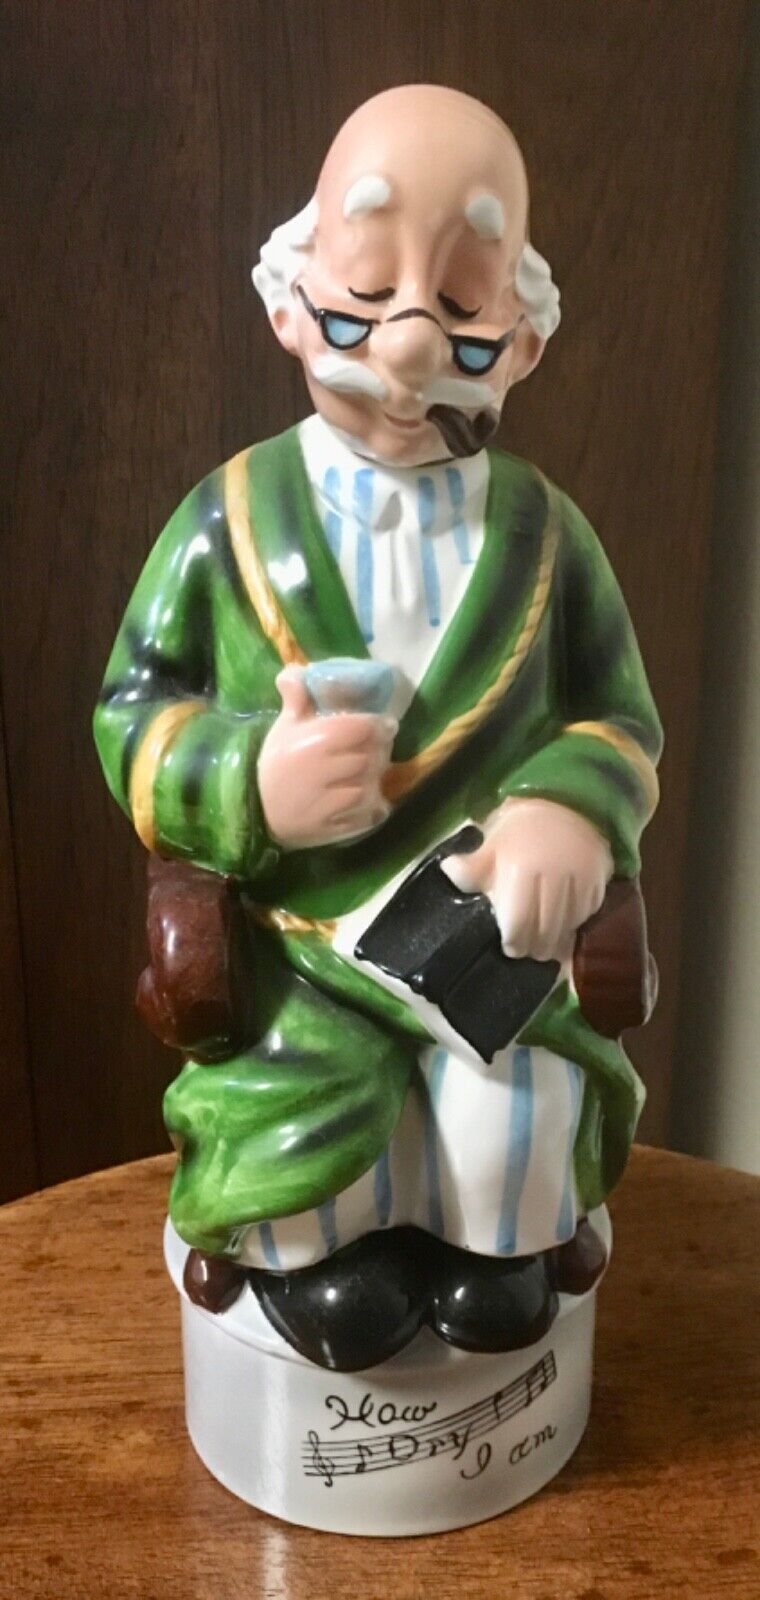 Music Box Decanter—Novelty Item for Bars, Man Caves, etc Never filled. MINT 1940